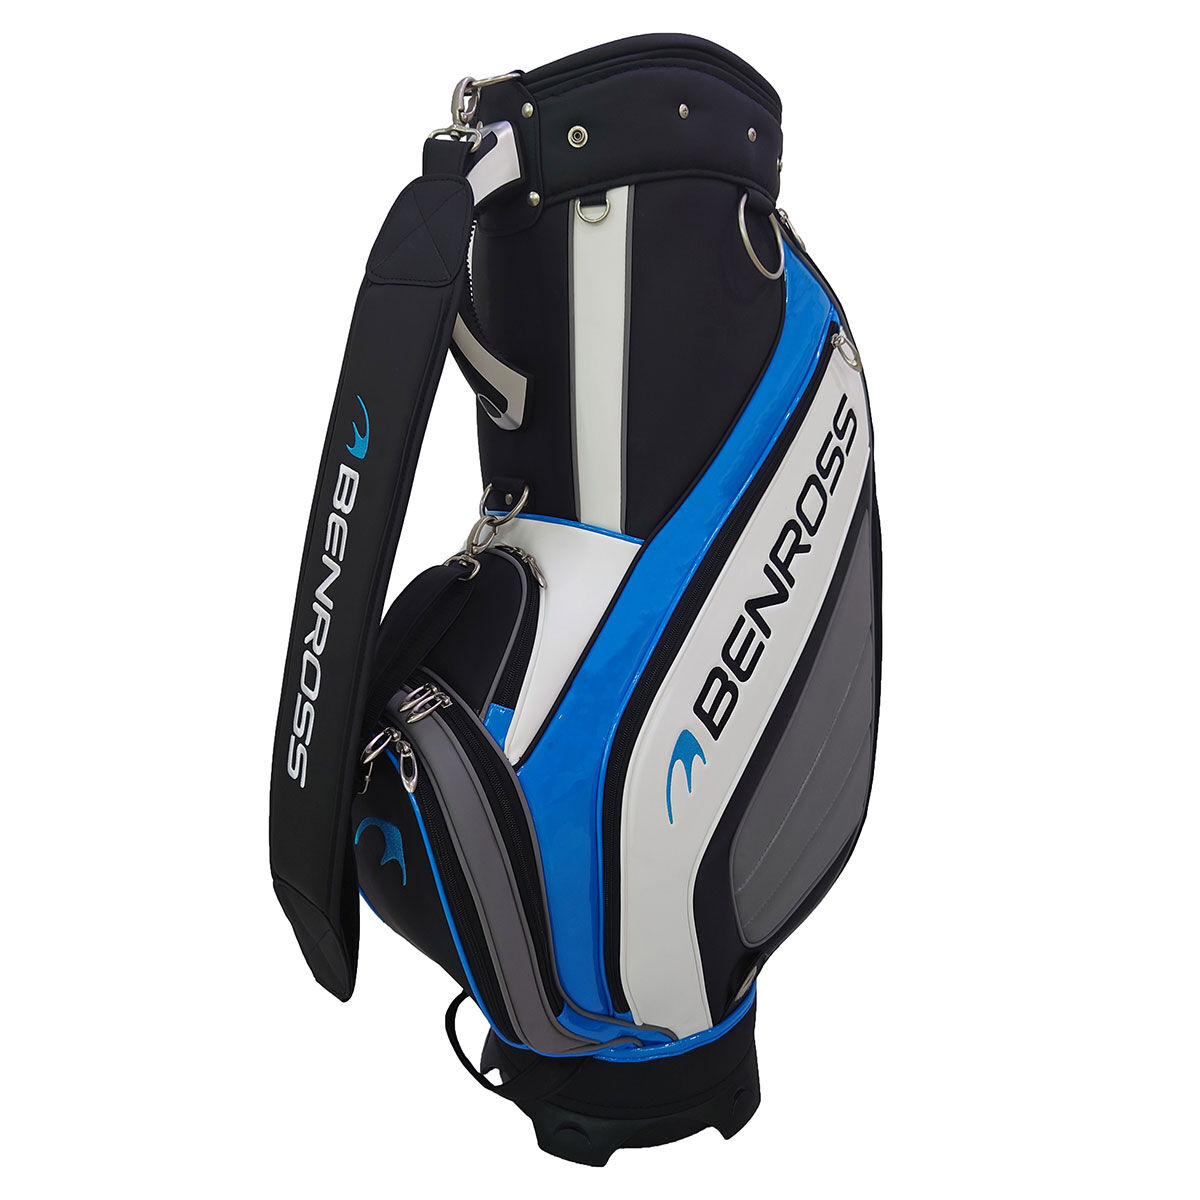 Benross Black, White and Blue Colour Block BR-PRO Tour Staff Golf Bag | American Golf, One Size von Benross